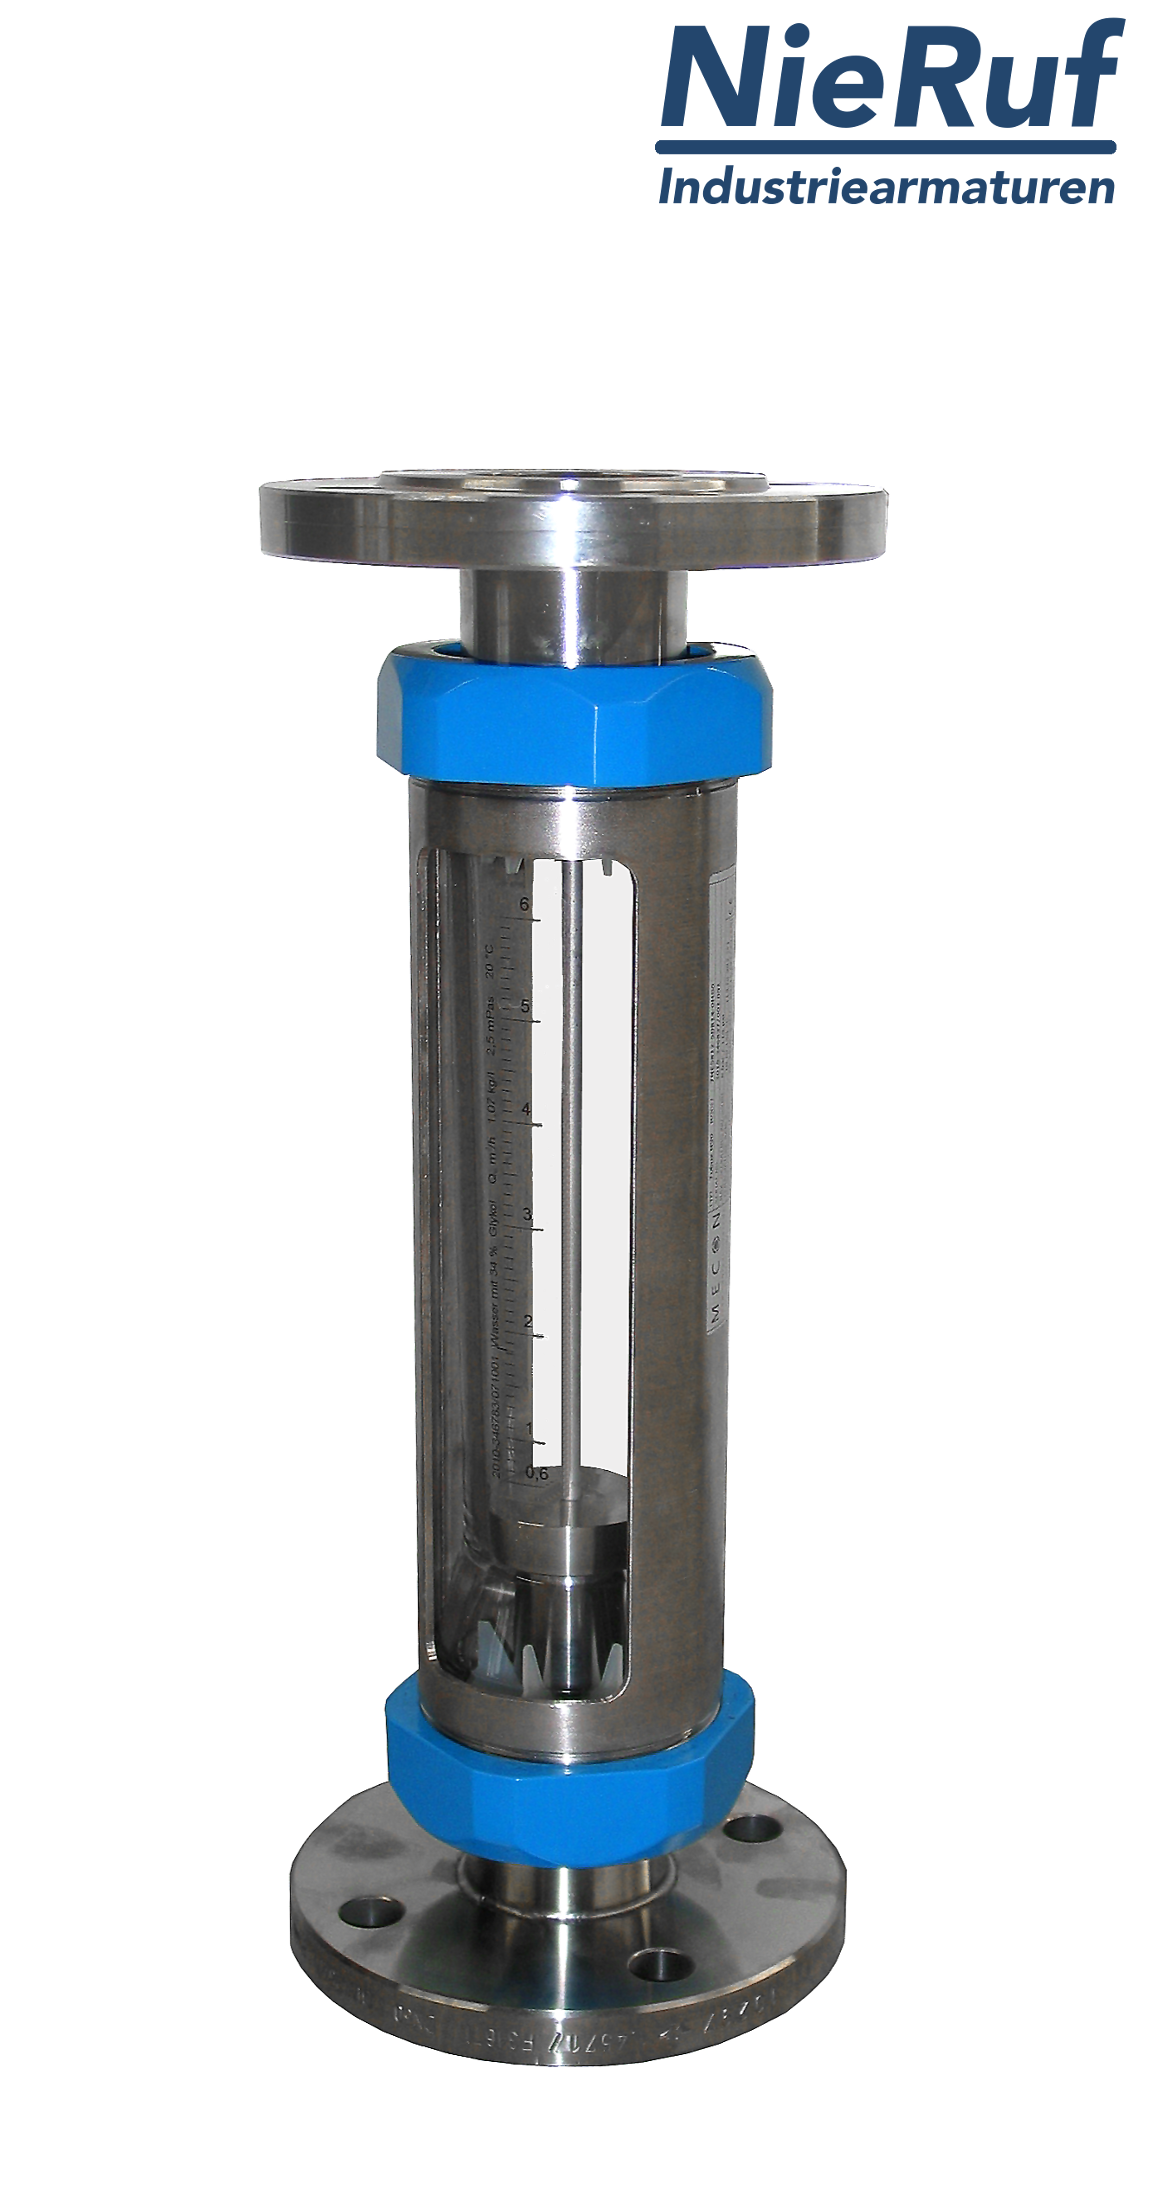 Variable area flowmeter stainless steel + borosilicate flange DN20 20.0 - 200.0 l/h water FKM